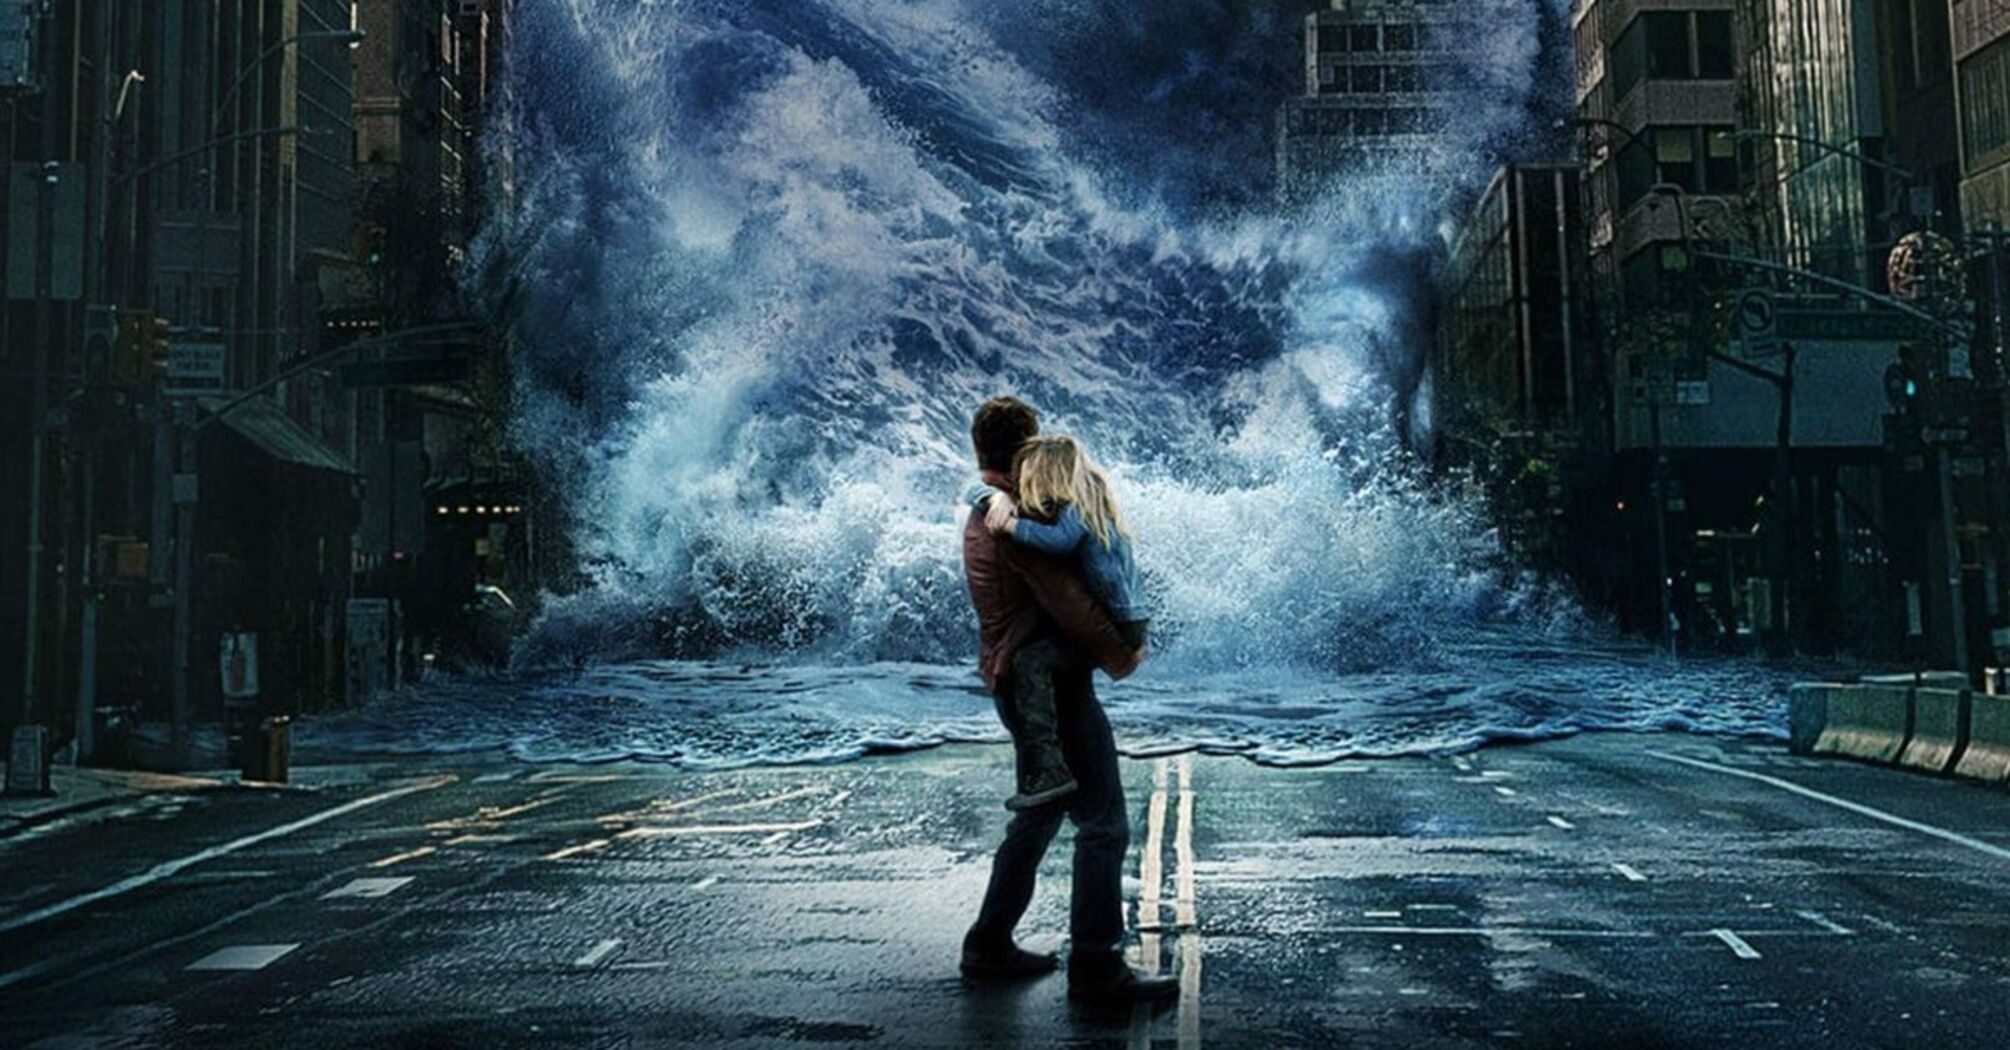 Top 5 exciting and epic disaster movies